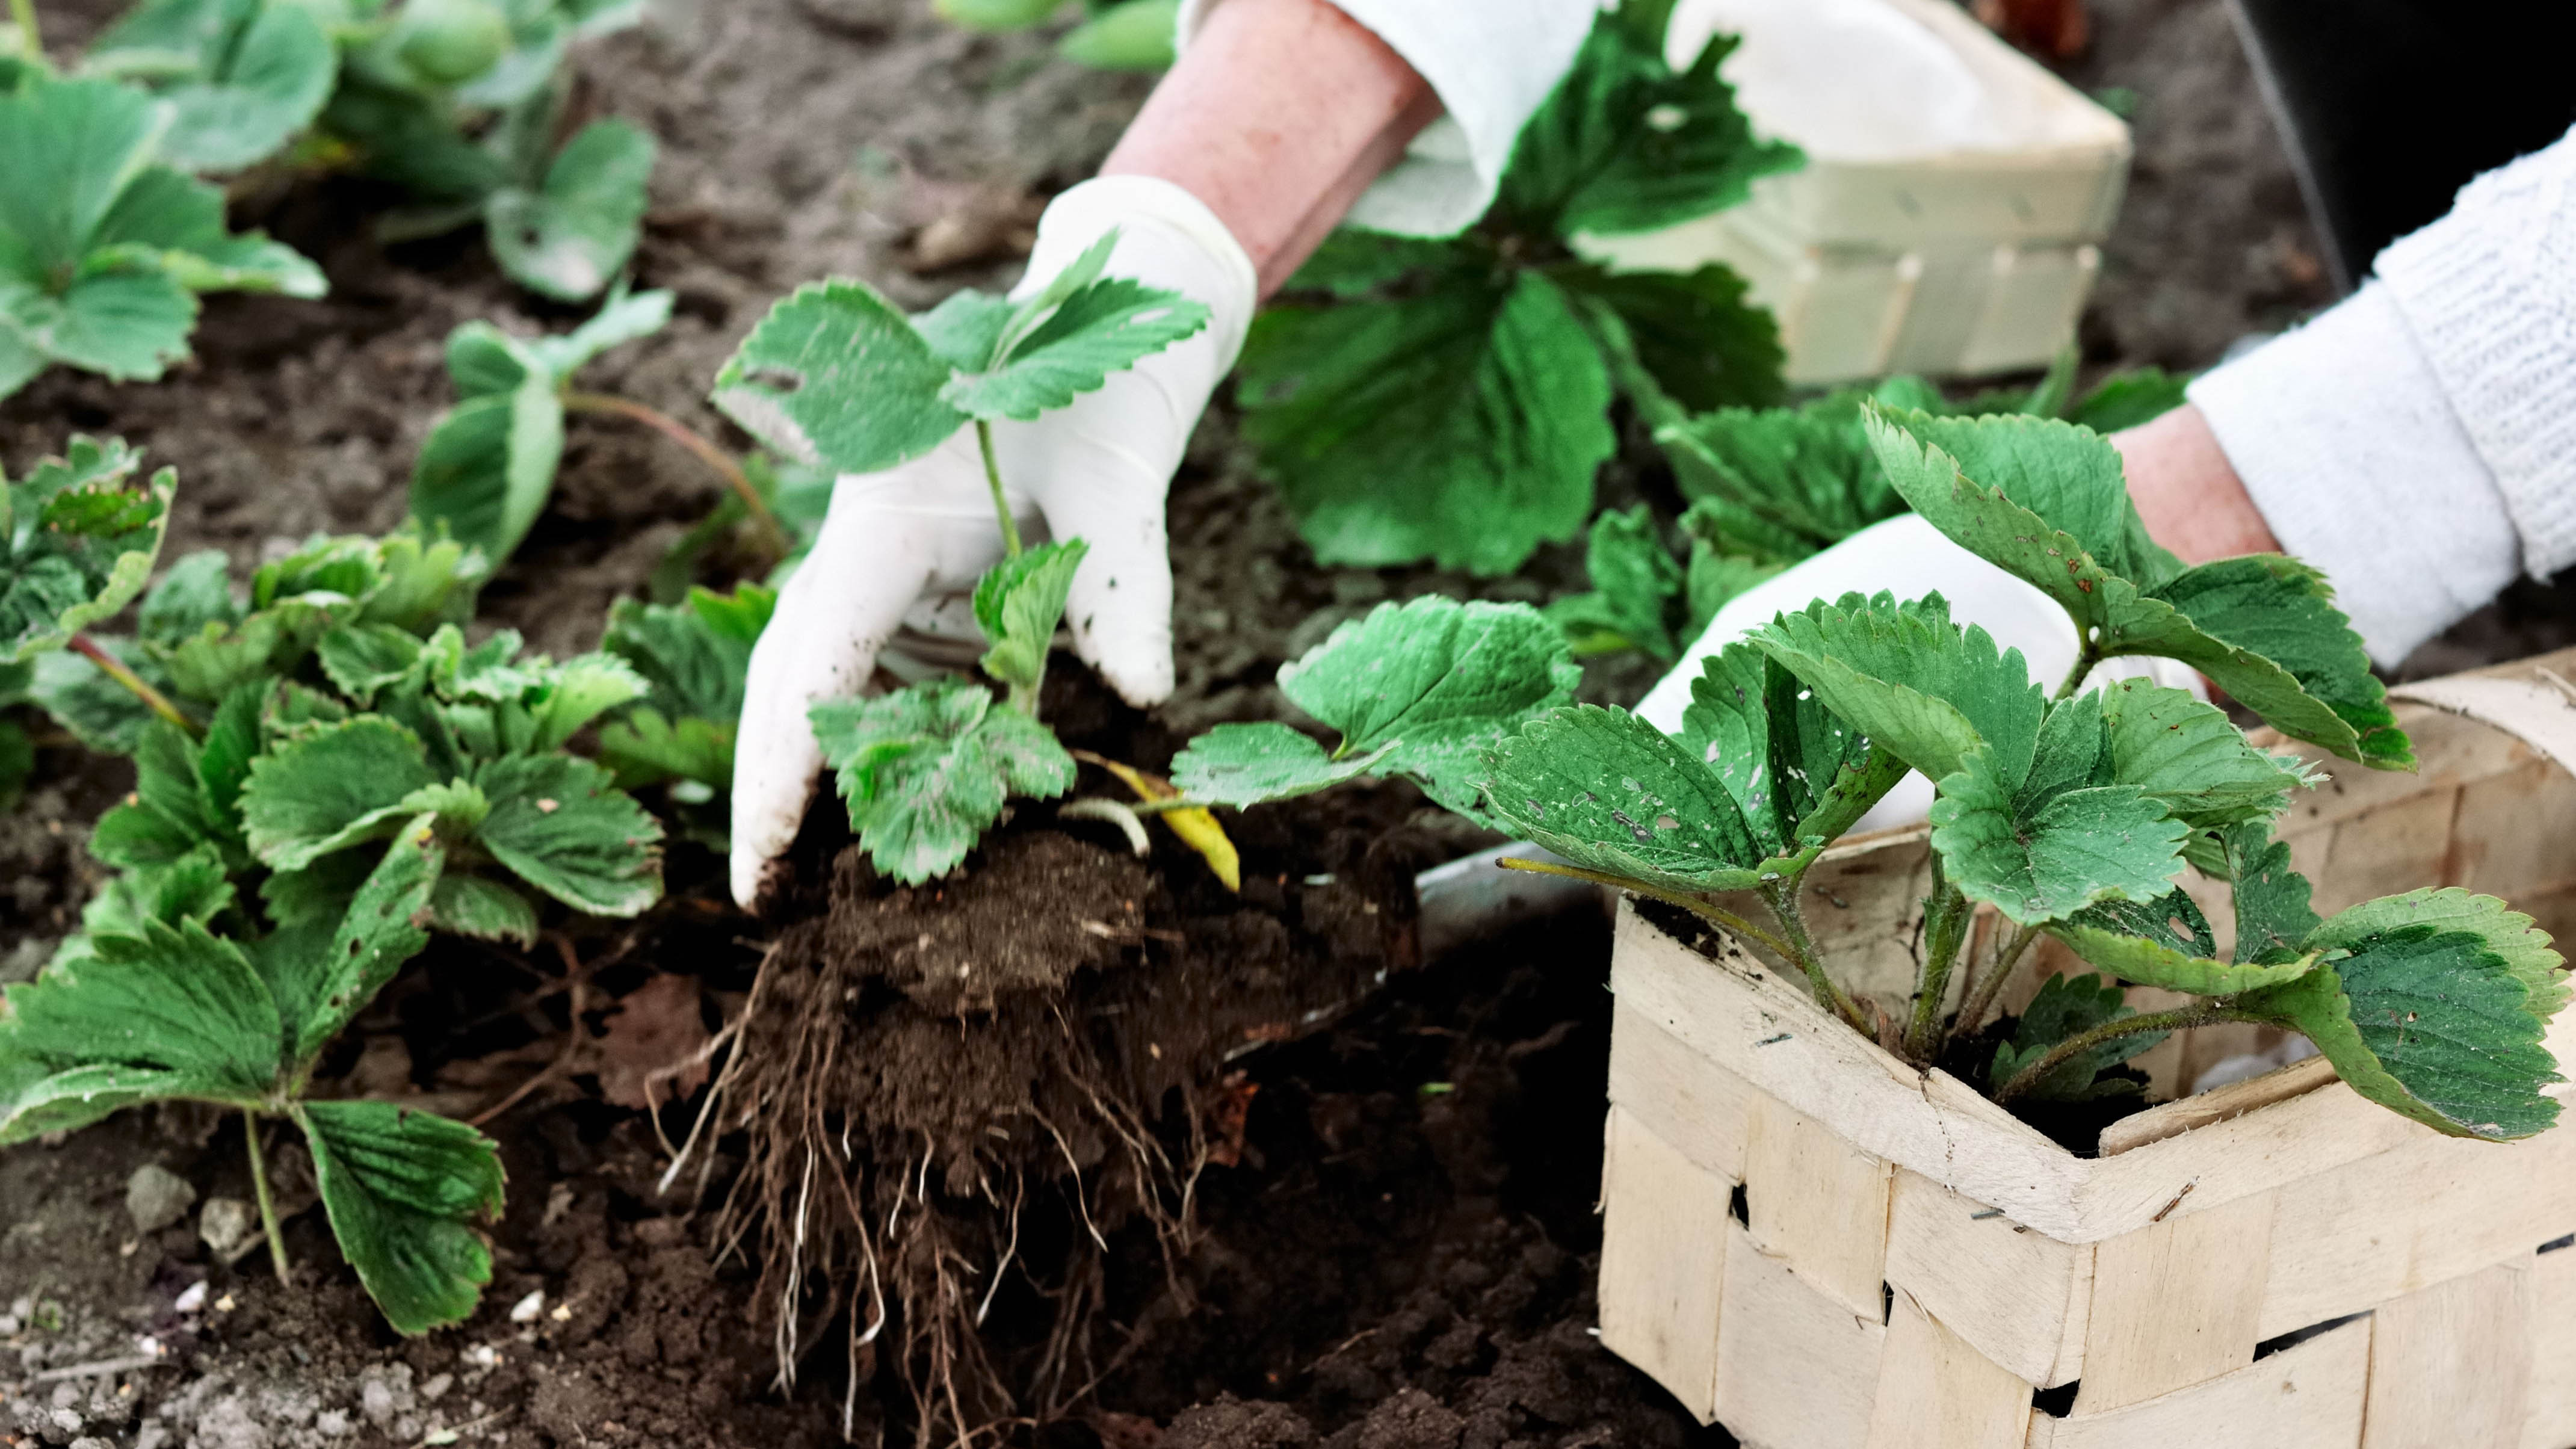 Planting rows of strawberries in the soil